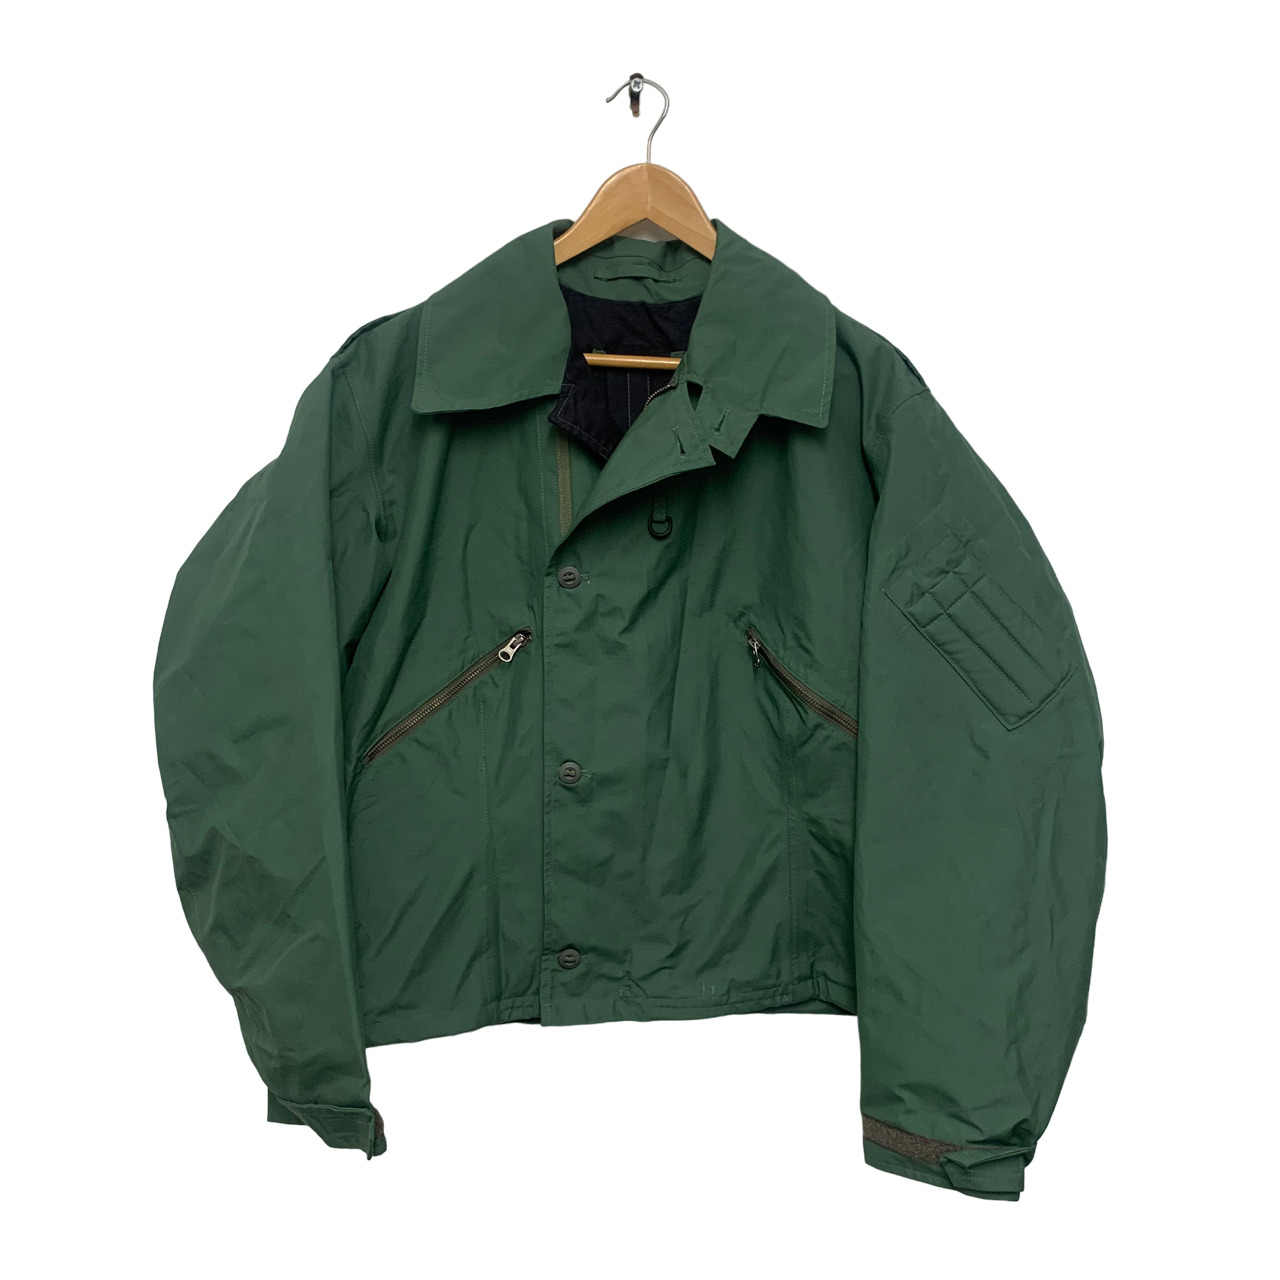 Ballyclare RAF Aircrew Jacket, Size: 7 Green MK4 FR Cold Weather British Army